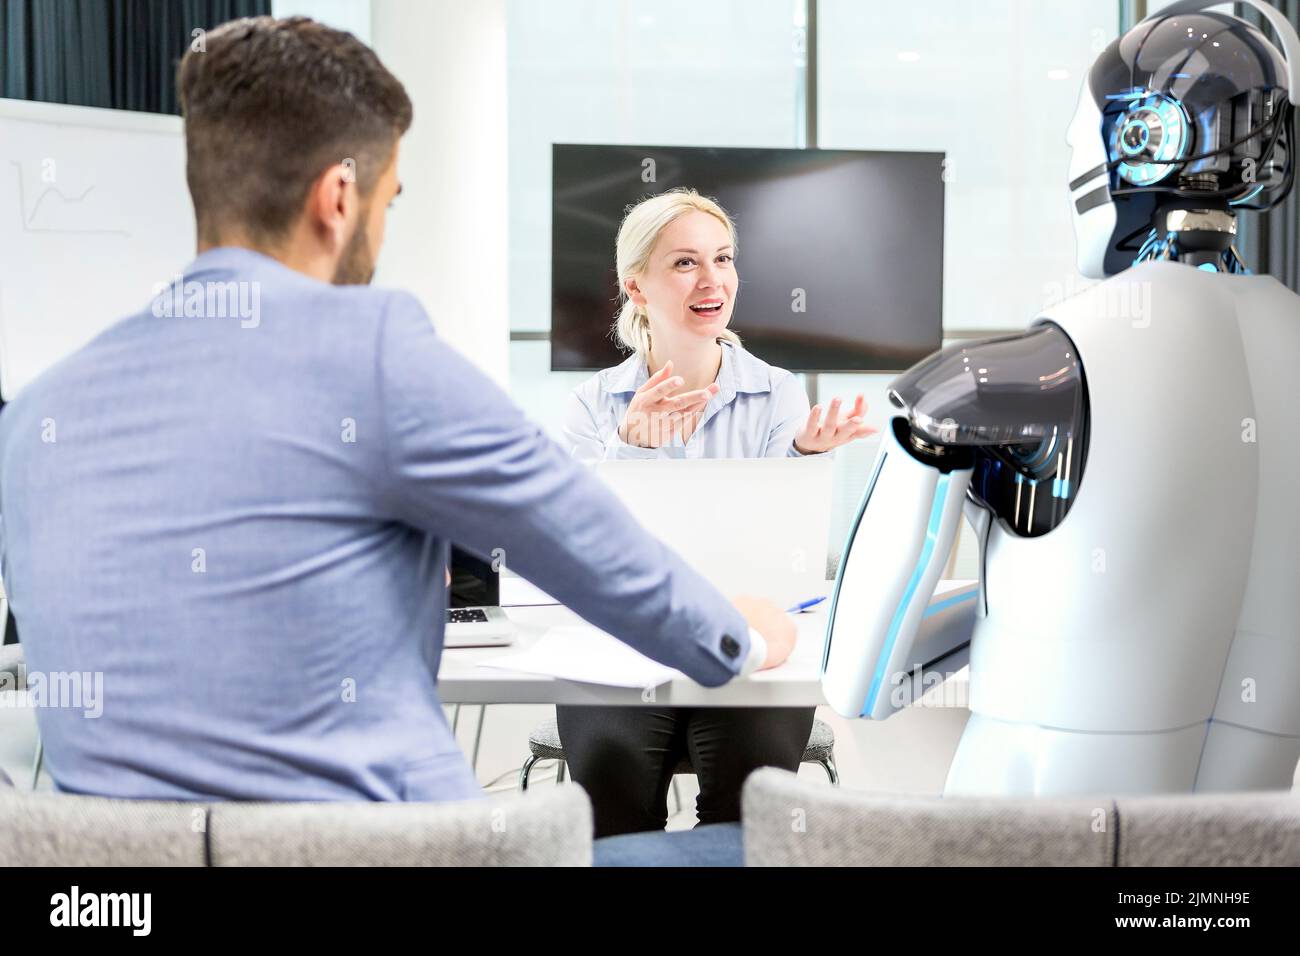 Workshop with a humanoid robot Stock Photo